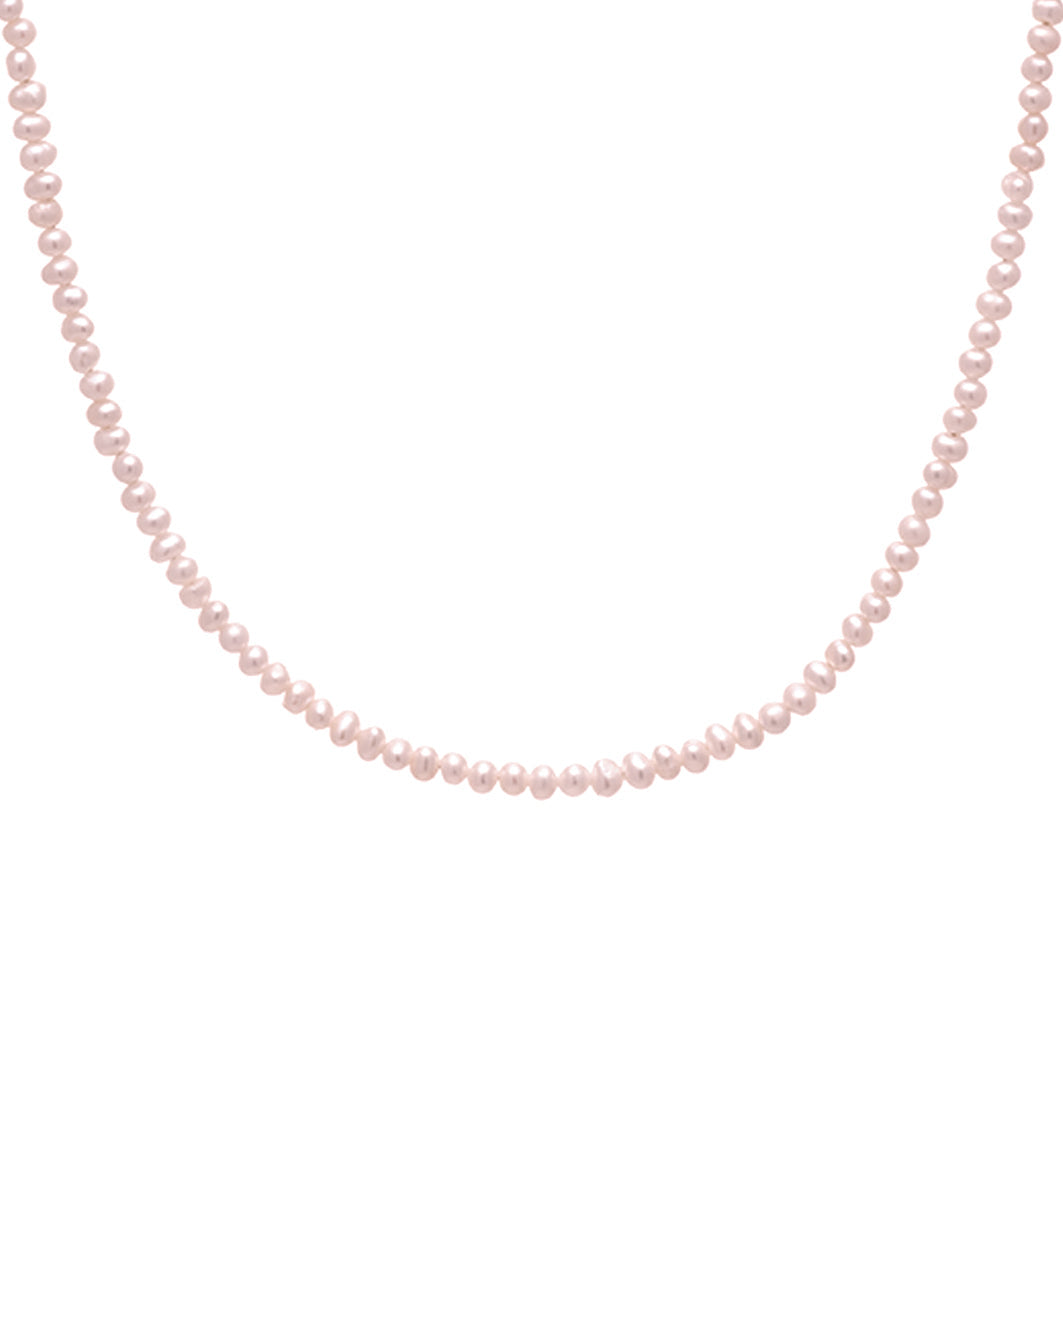 Pearl L necklace